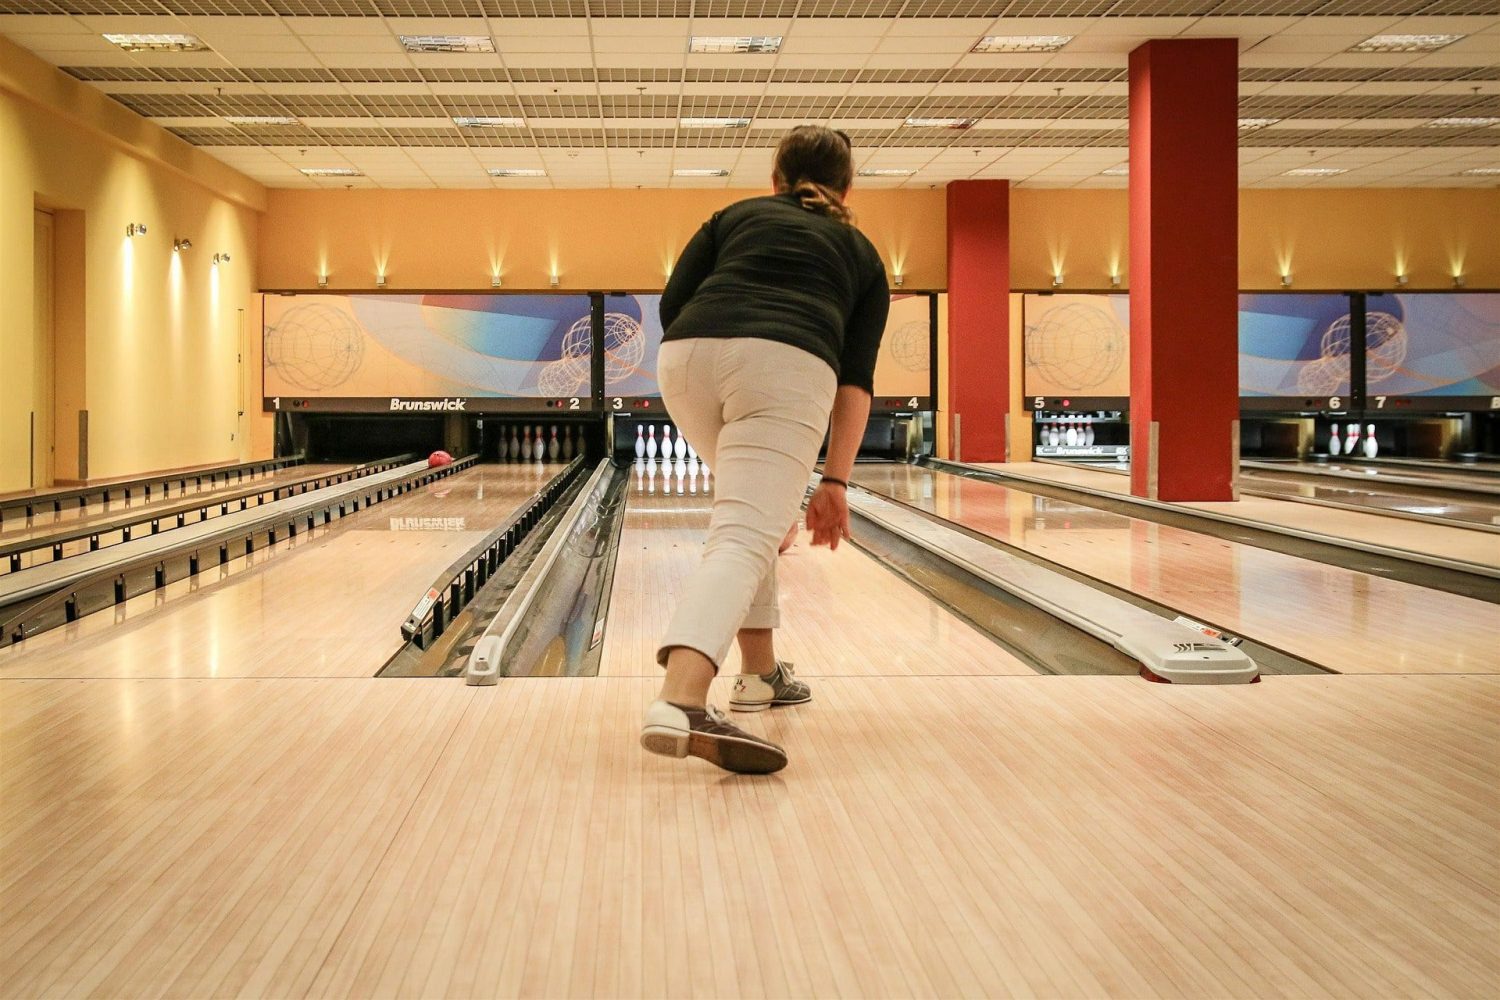 Best Bowling Tips and Tricks for Beginners